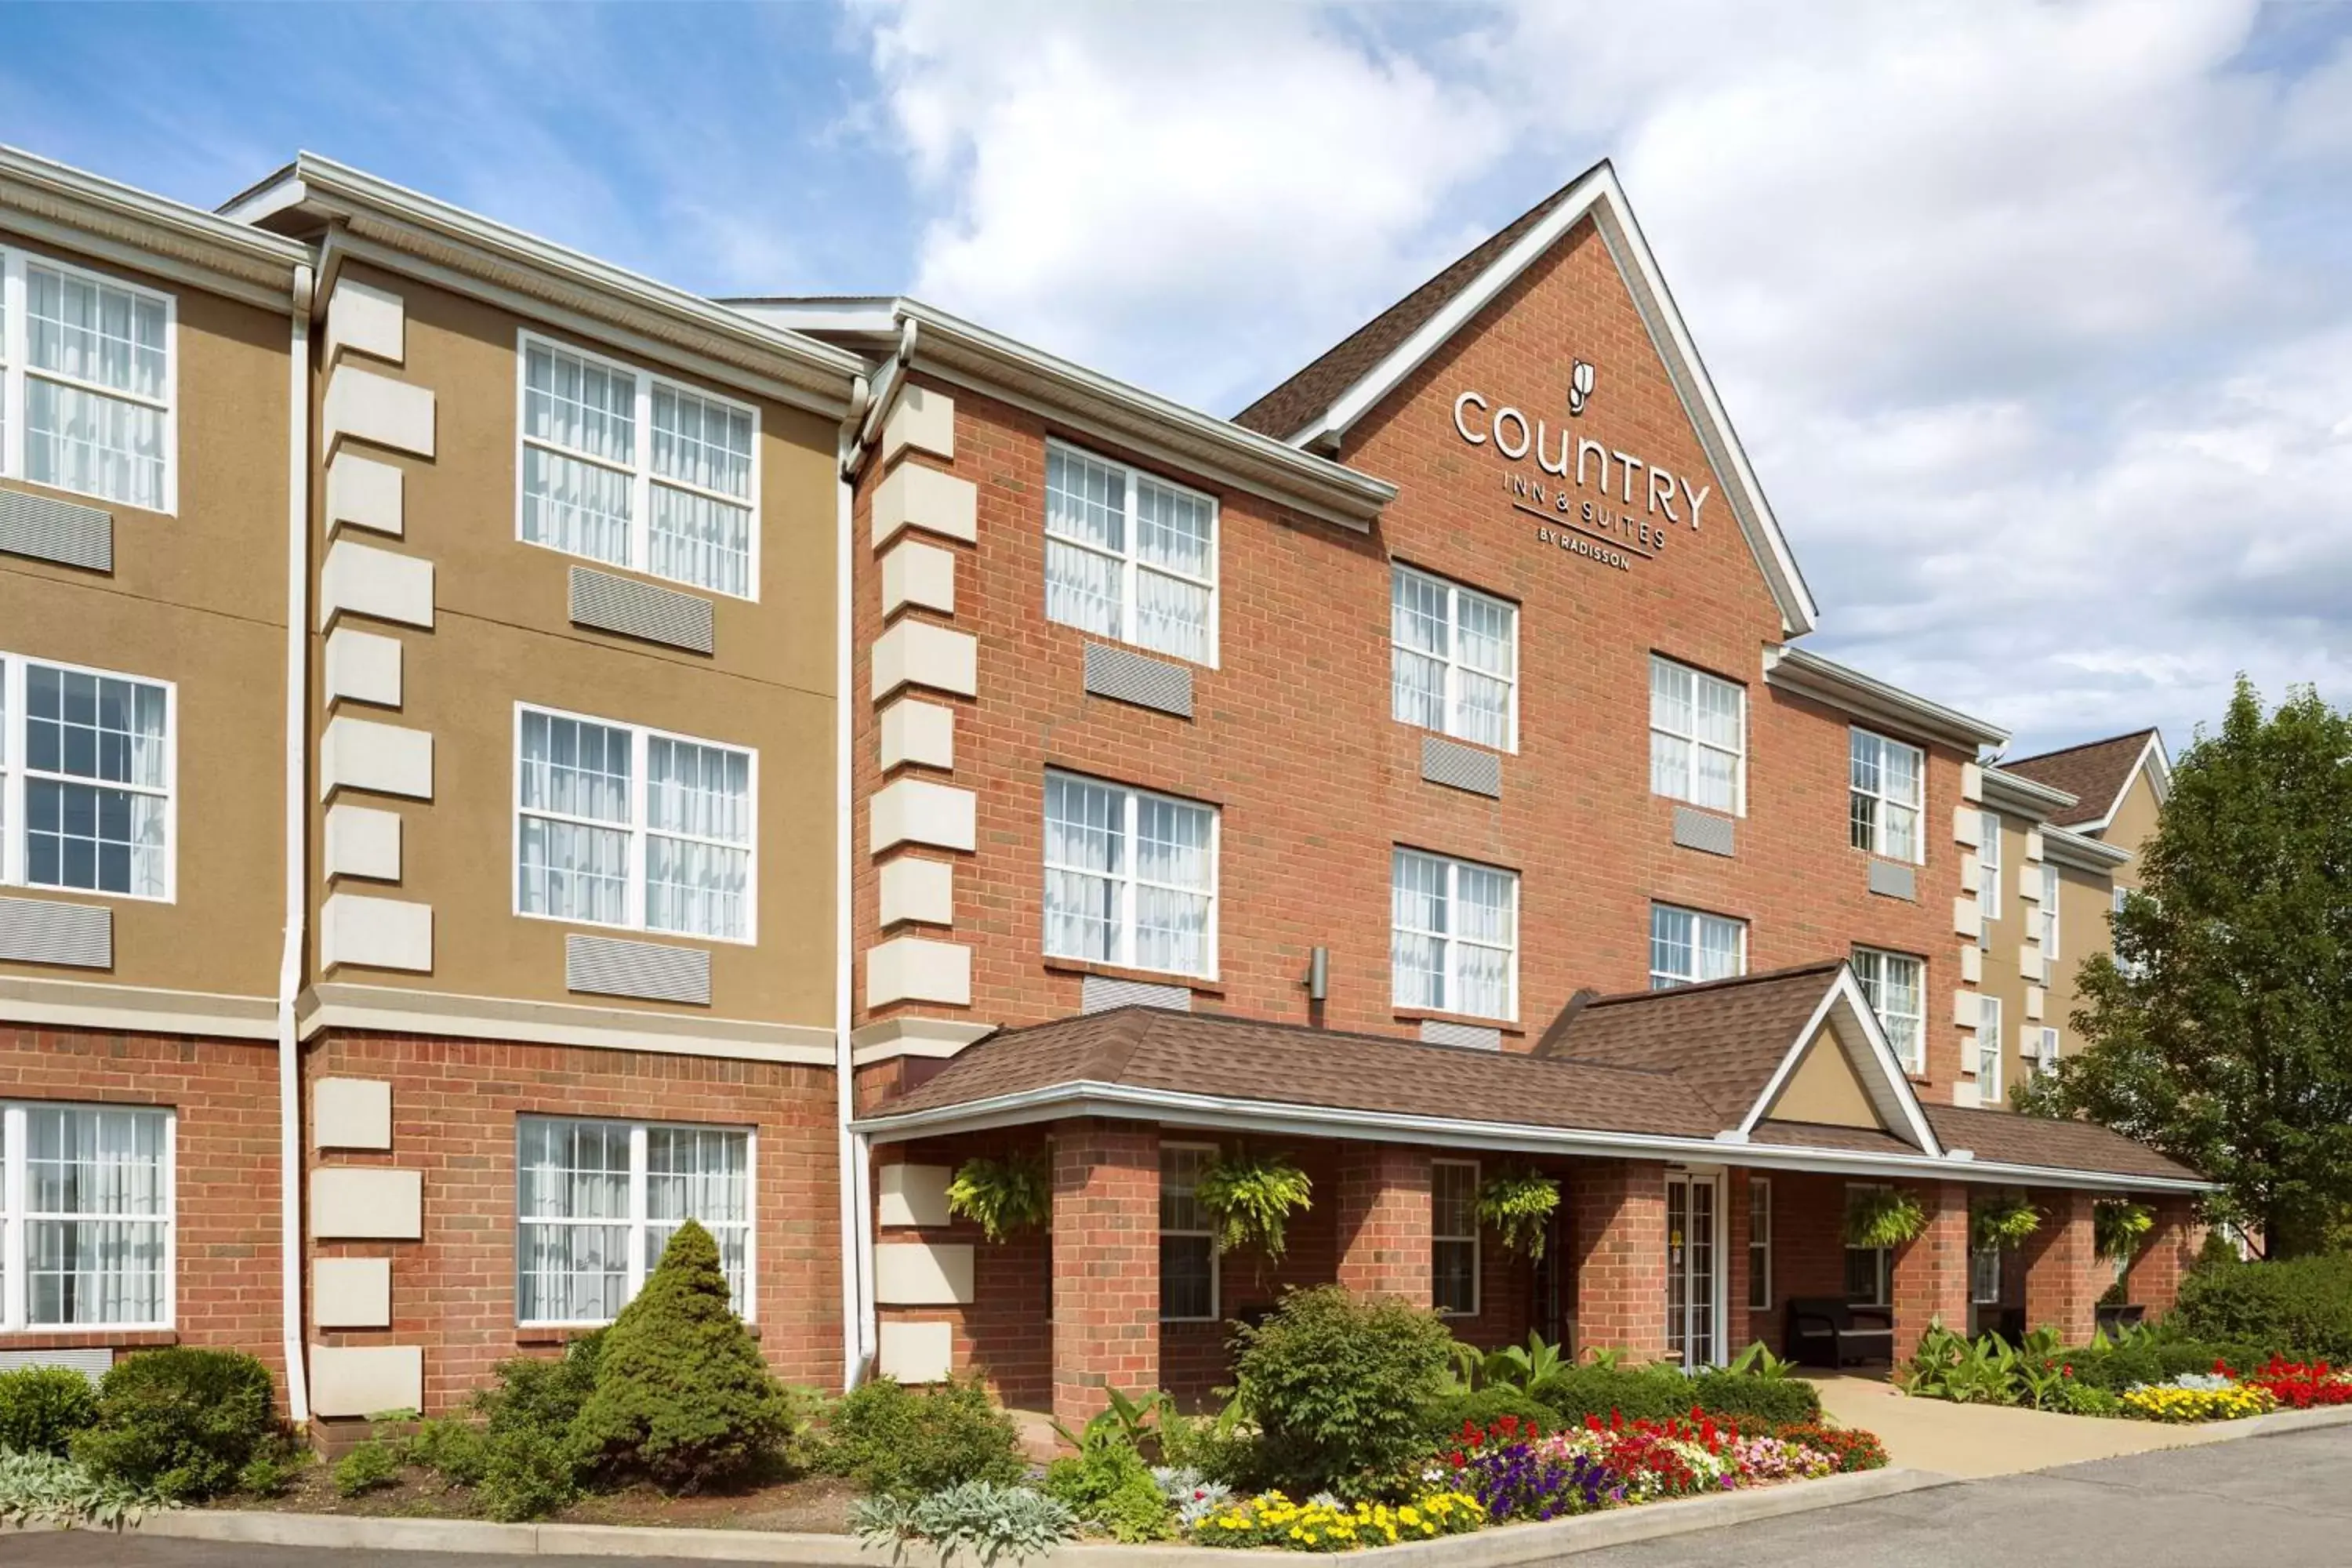 Property building in Country Inn & Suites by Radisson, Macedonia, OH